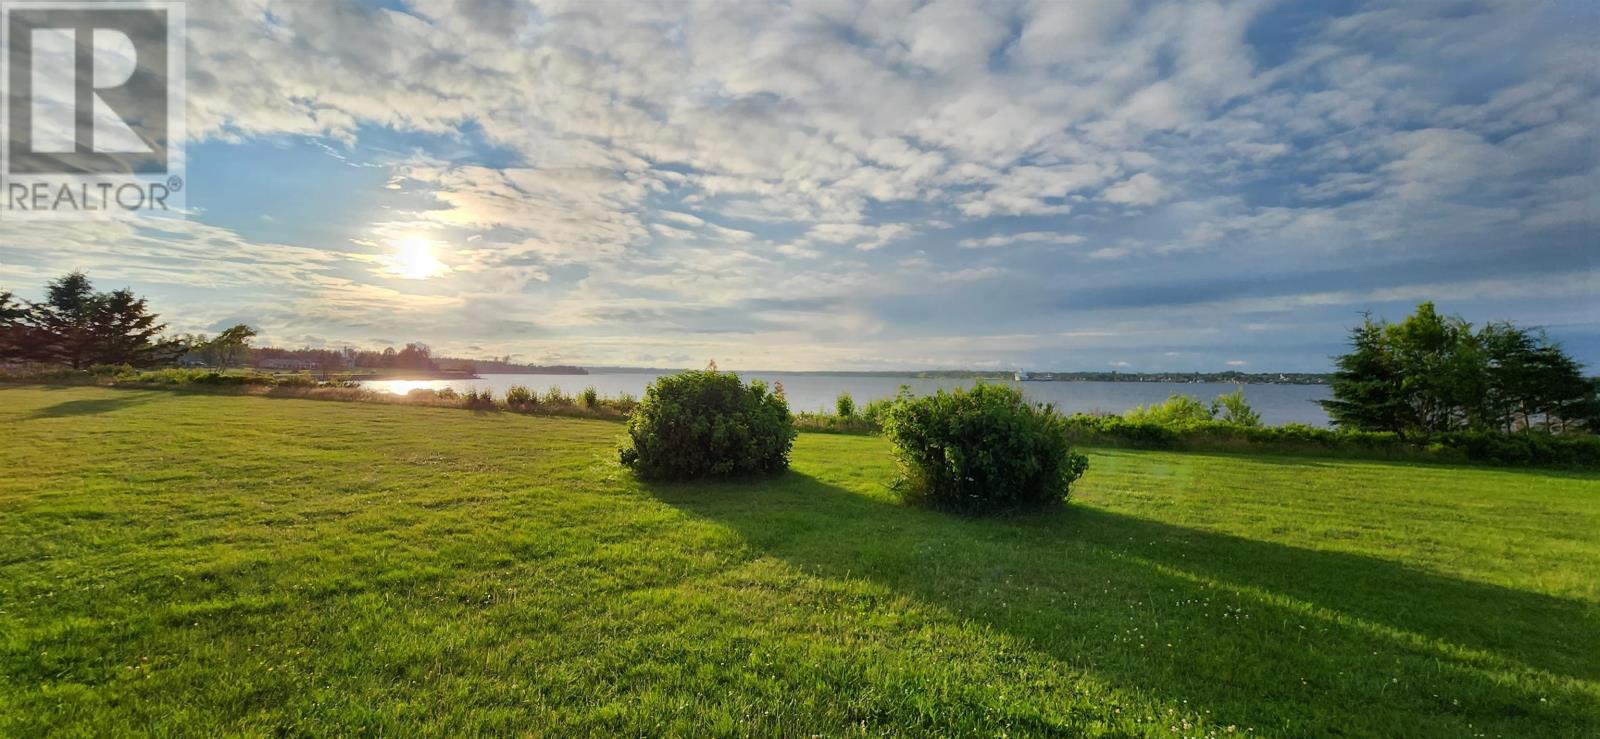 Lot 1 545 St.Andrew's Point Road, lower montague, Prince Edward Island